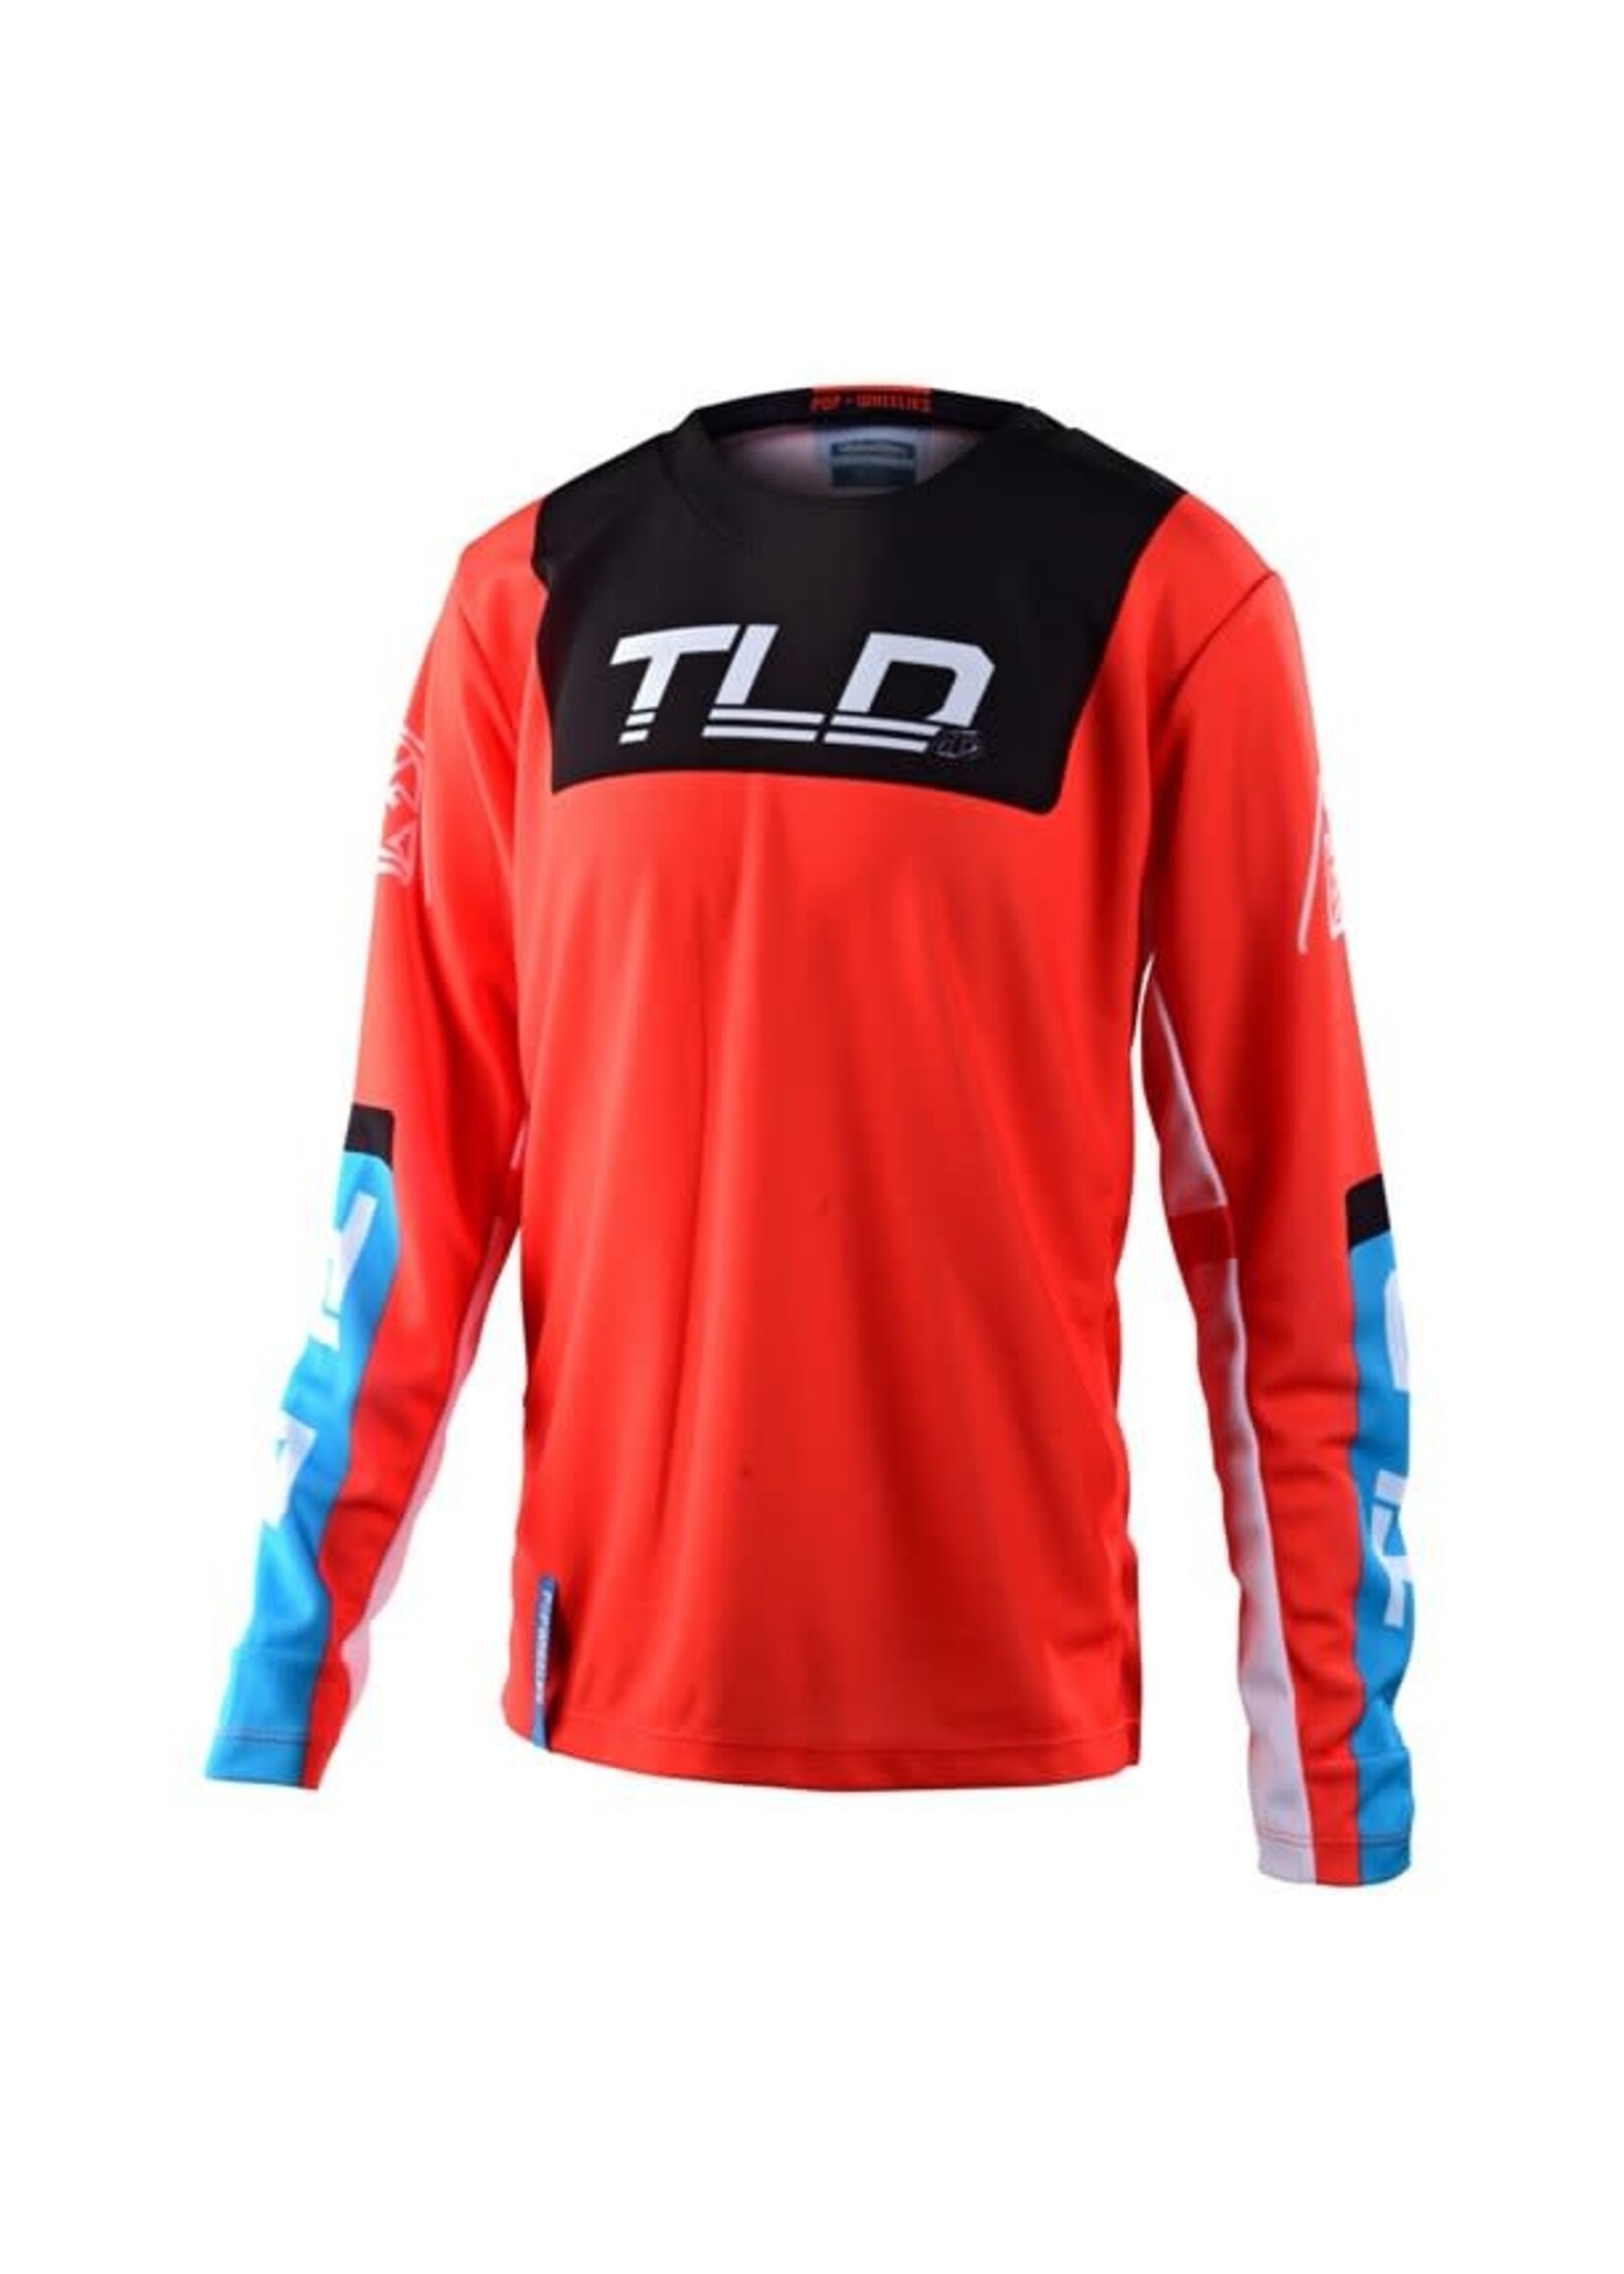 TROY LEE DESIGNS TROYLEE DESIGN YOUTH GP JERSEY FRACTURA